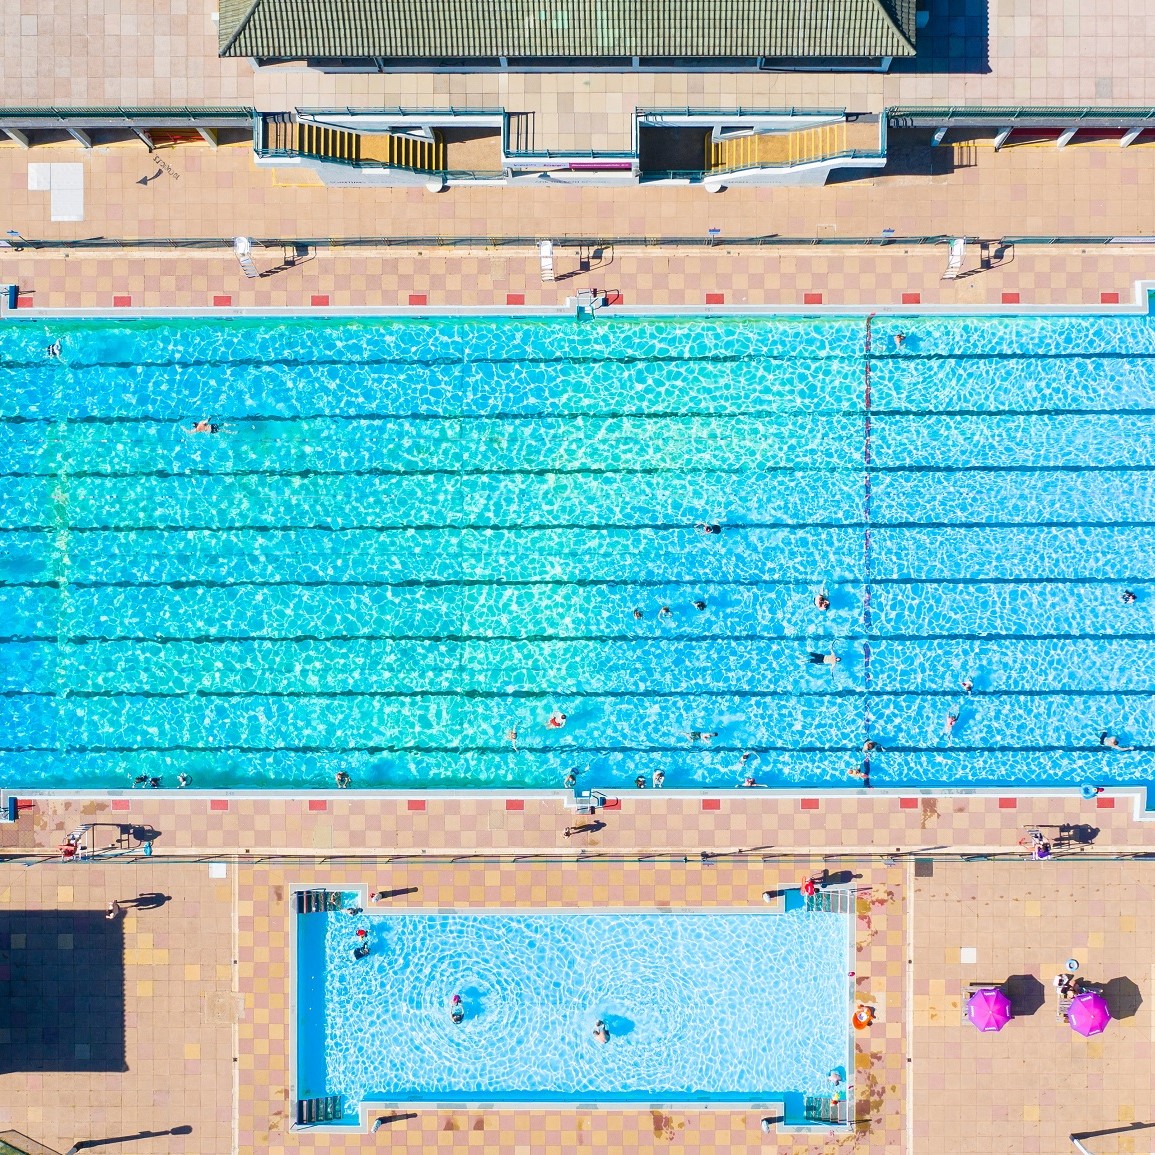 Vivacity Lido in Peterborough. Getty Images